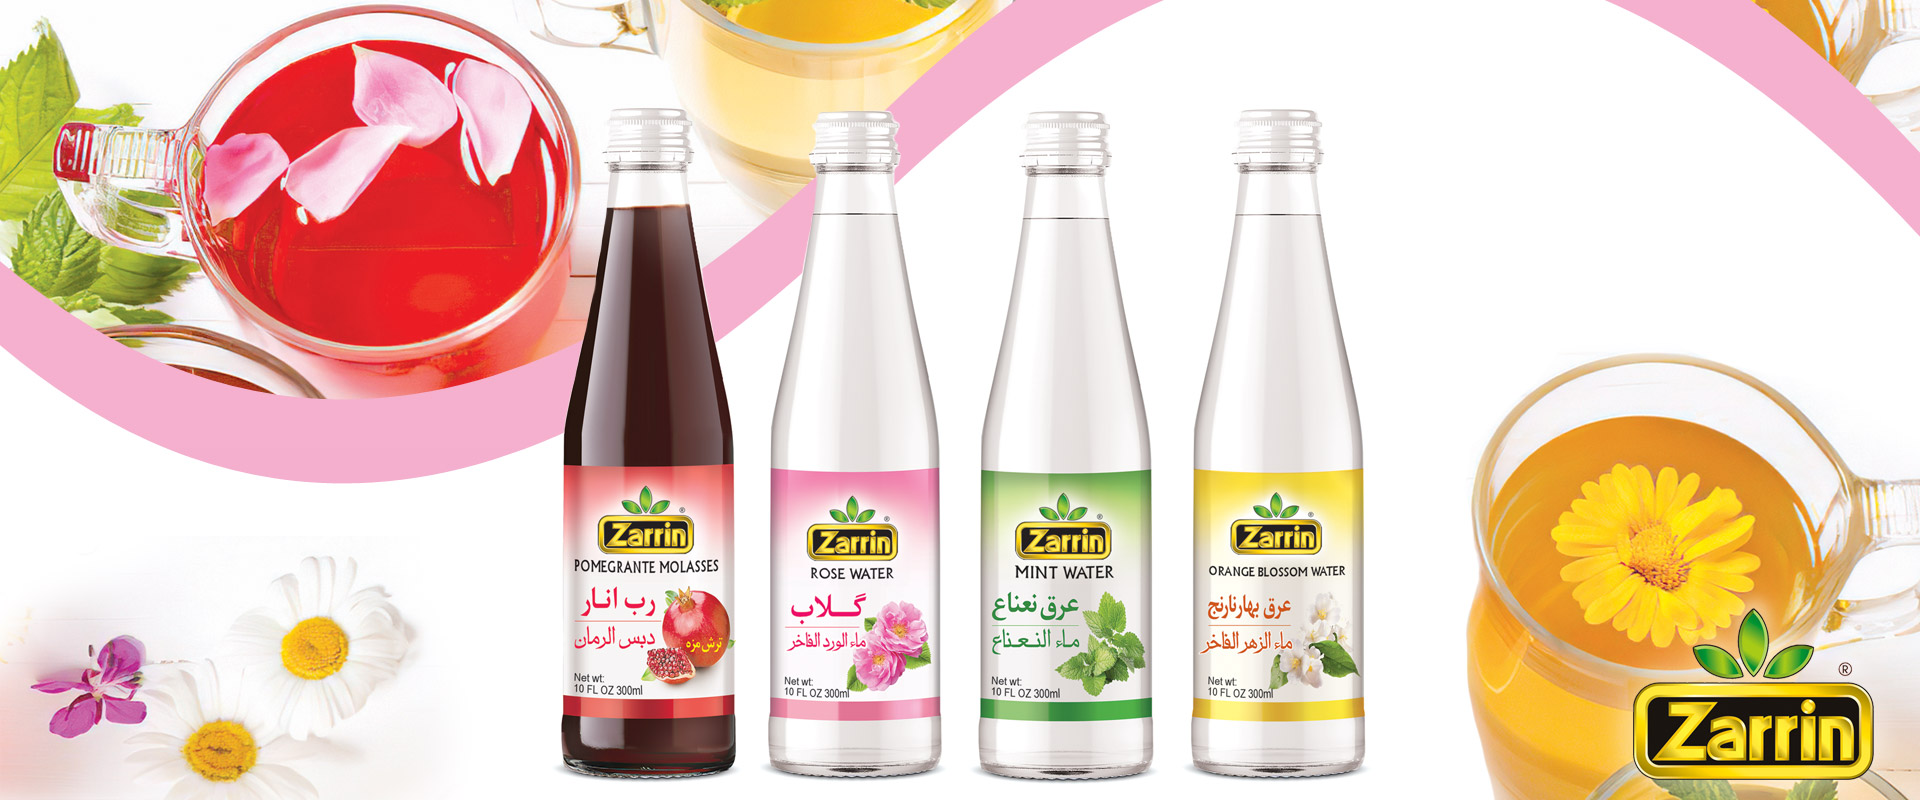 Middle Eastern Food Distributors. Products Such As Rose, Orange Blossom, and Mint Water.